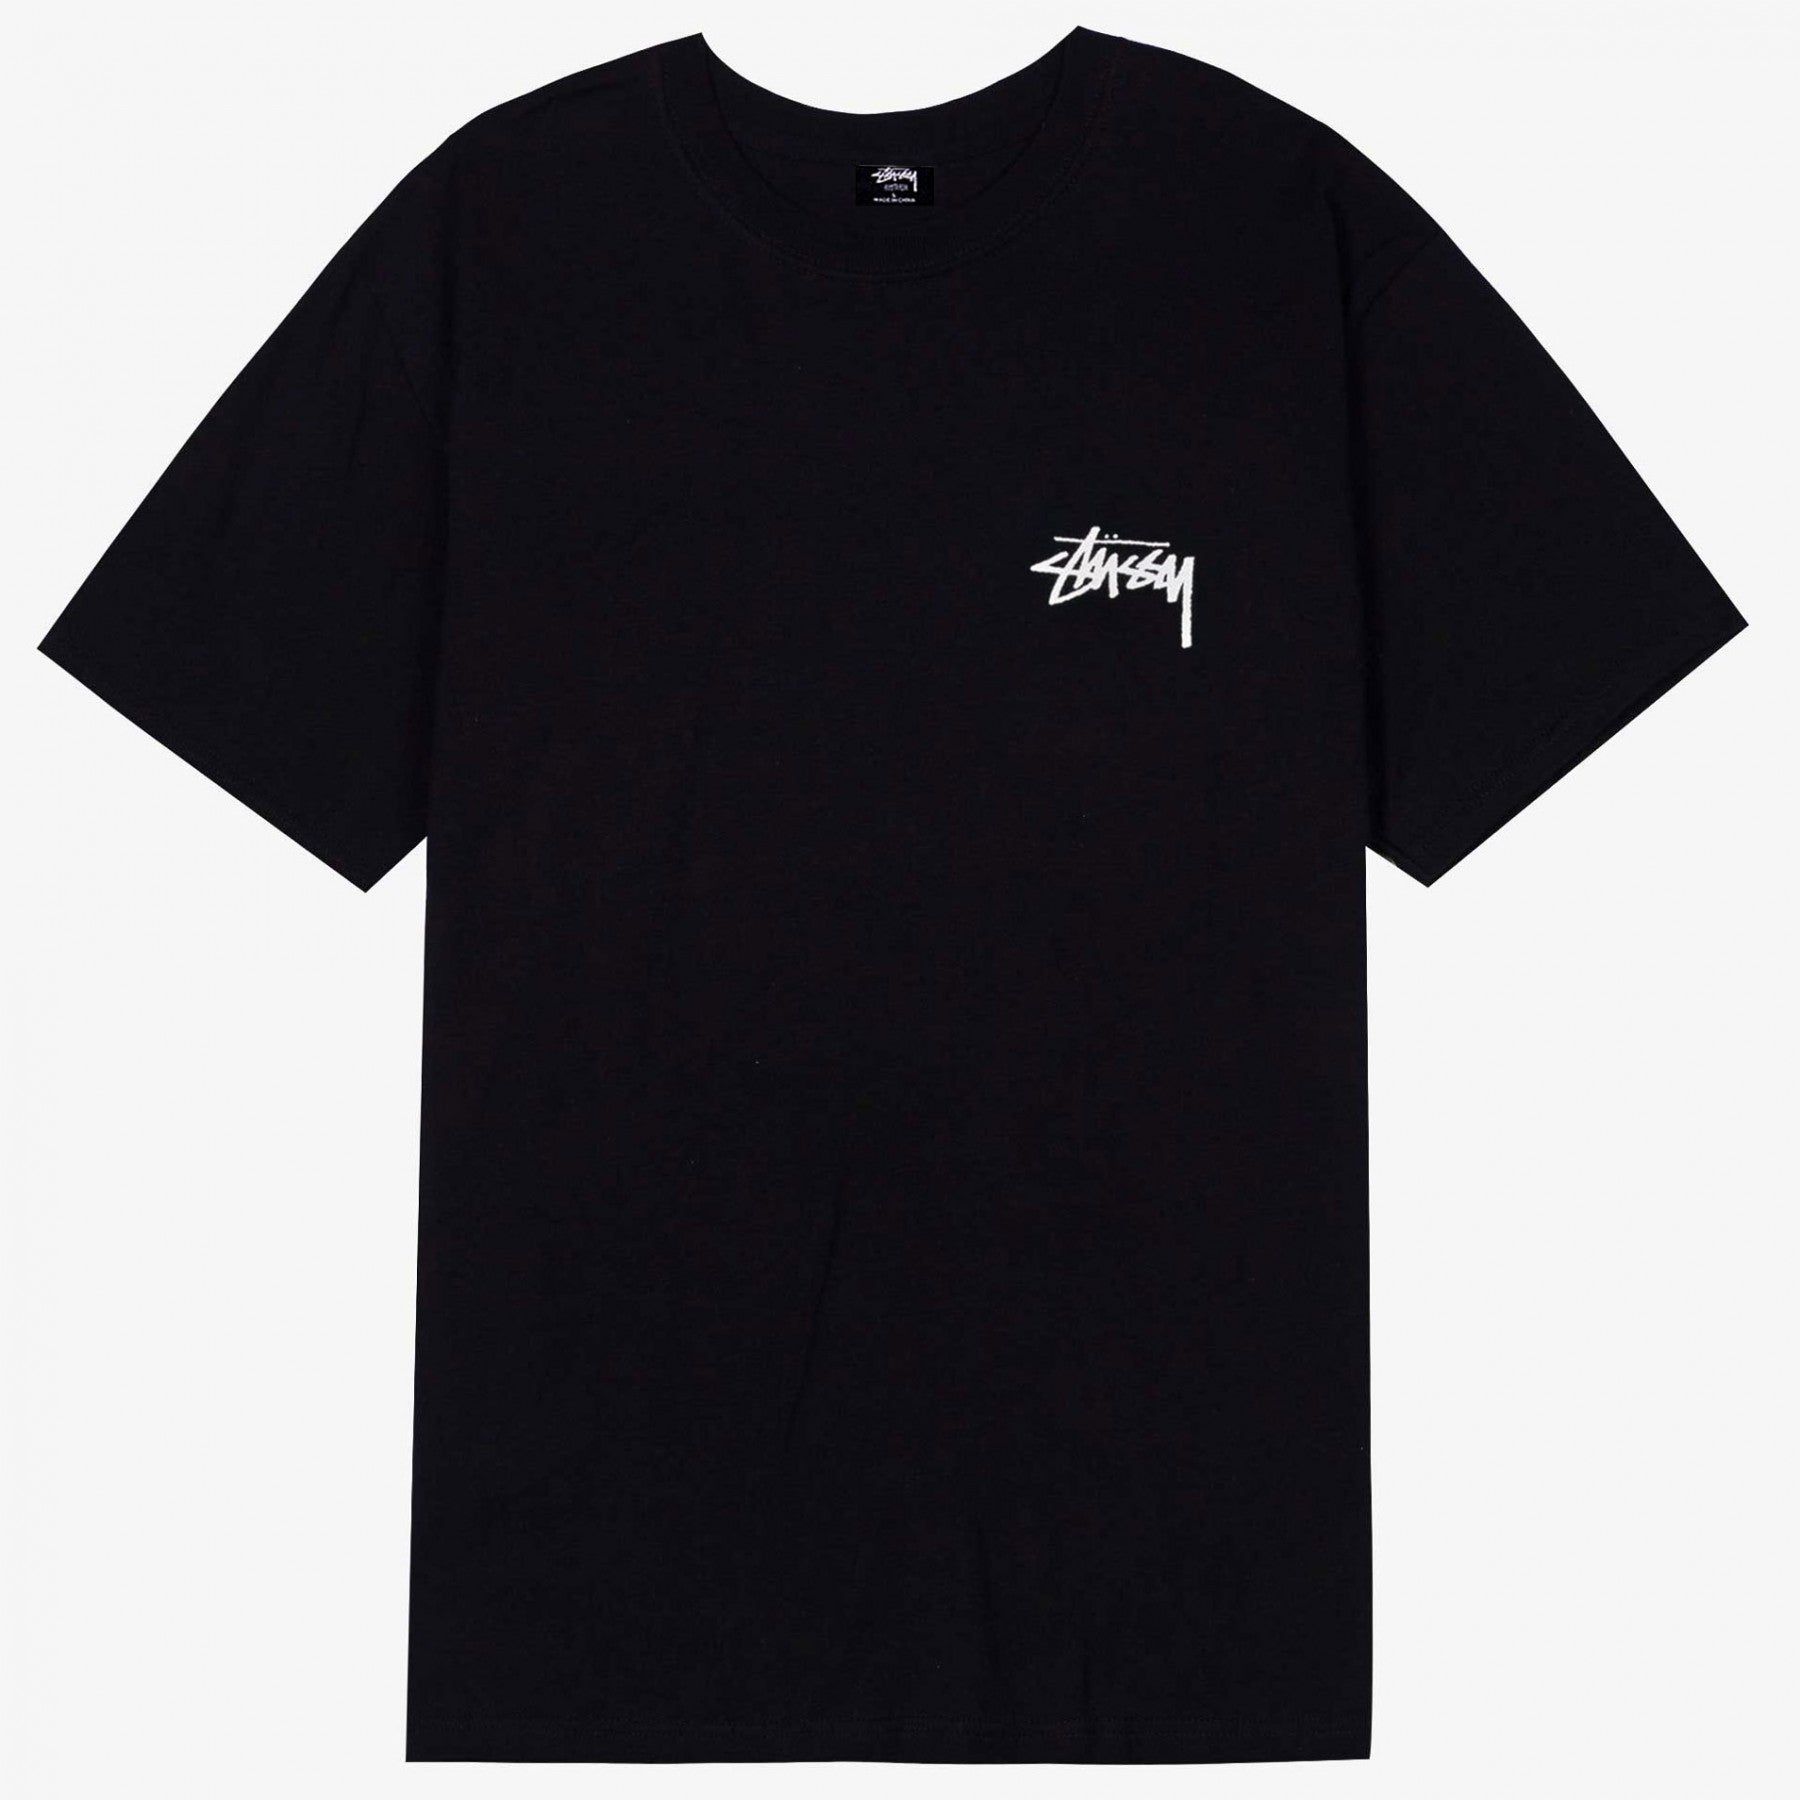 STUSSY PAIR OF DICE SOLID T-SHIRT BLACK